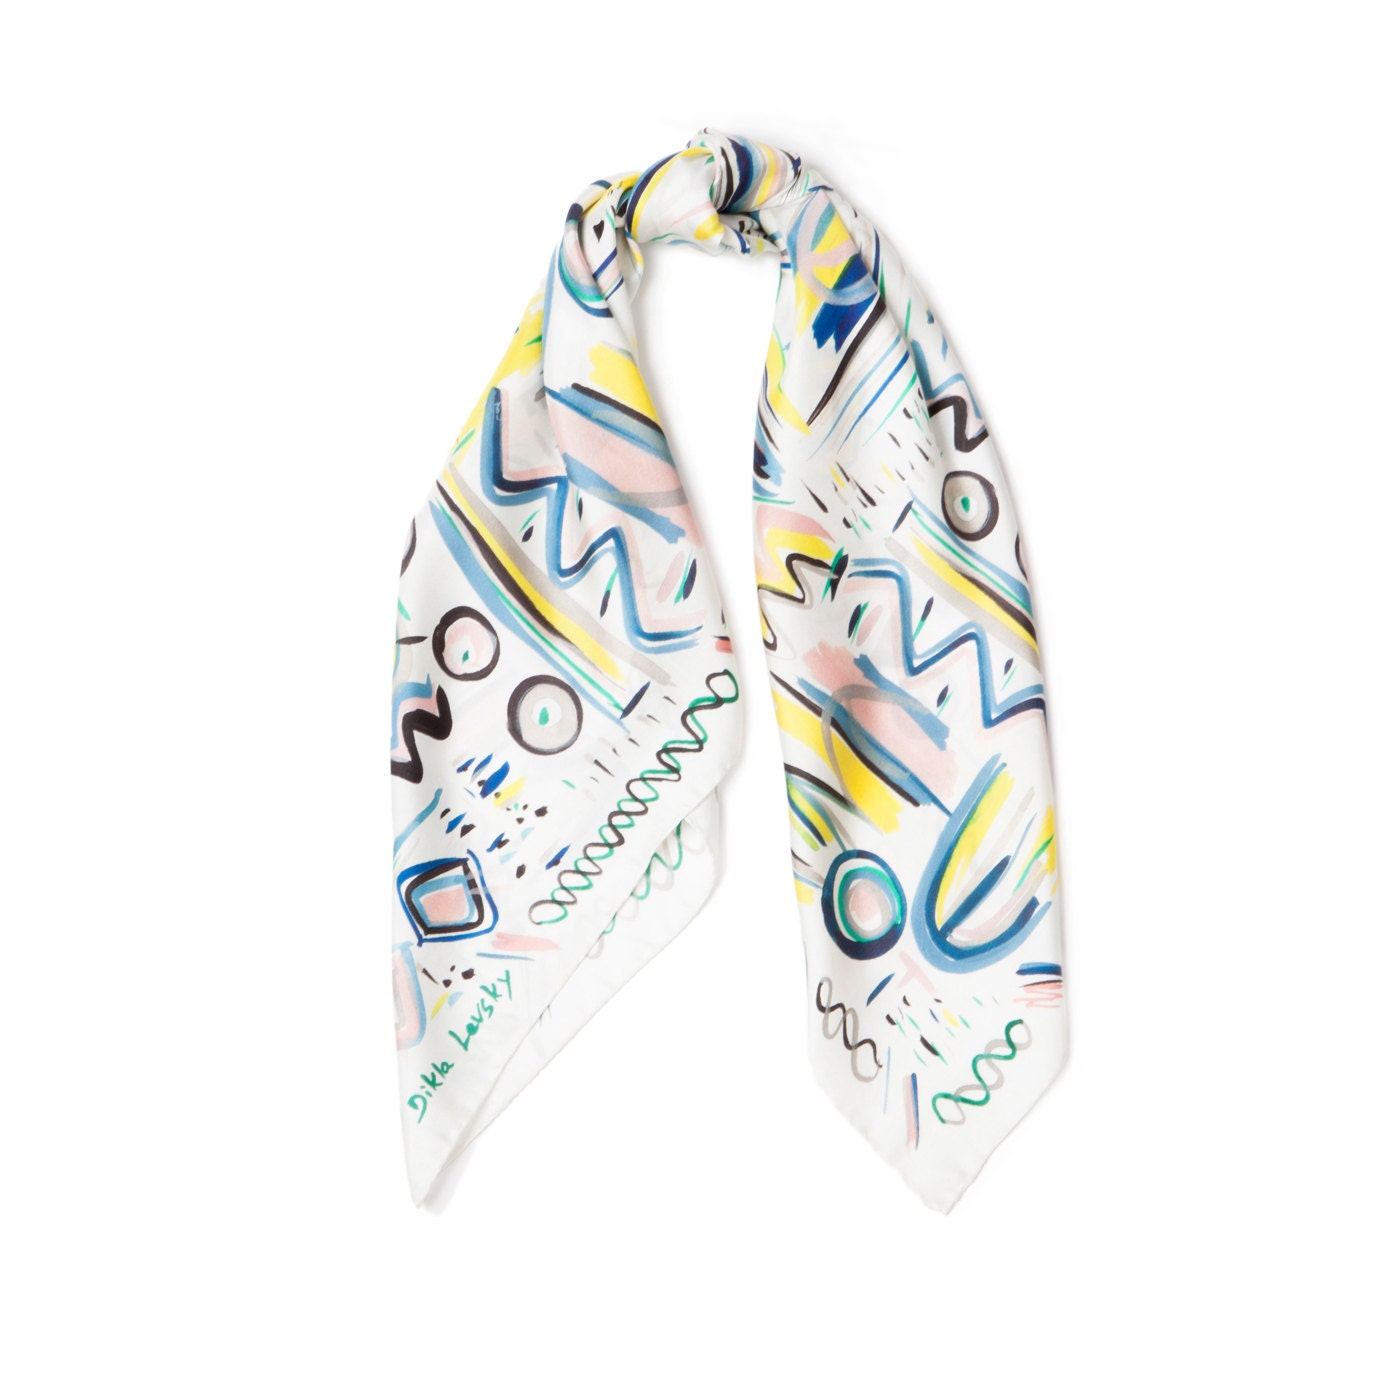 Printed Silk Square Scarf White and Colorful Elegant Twill - Etsy